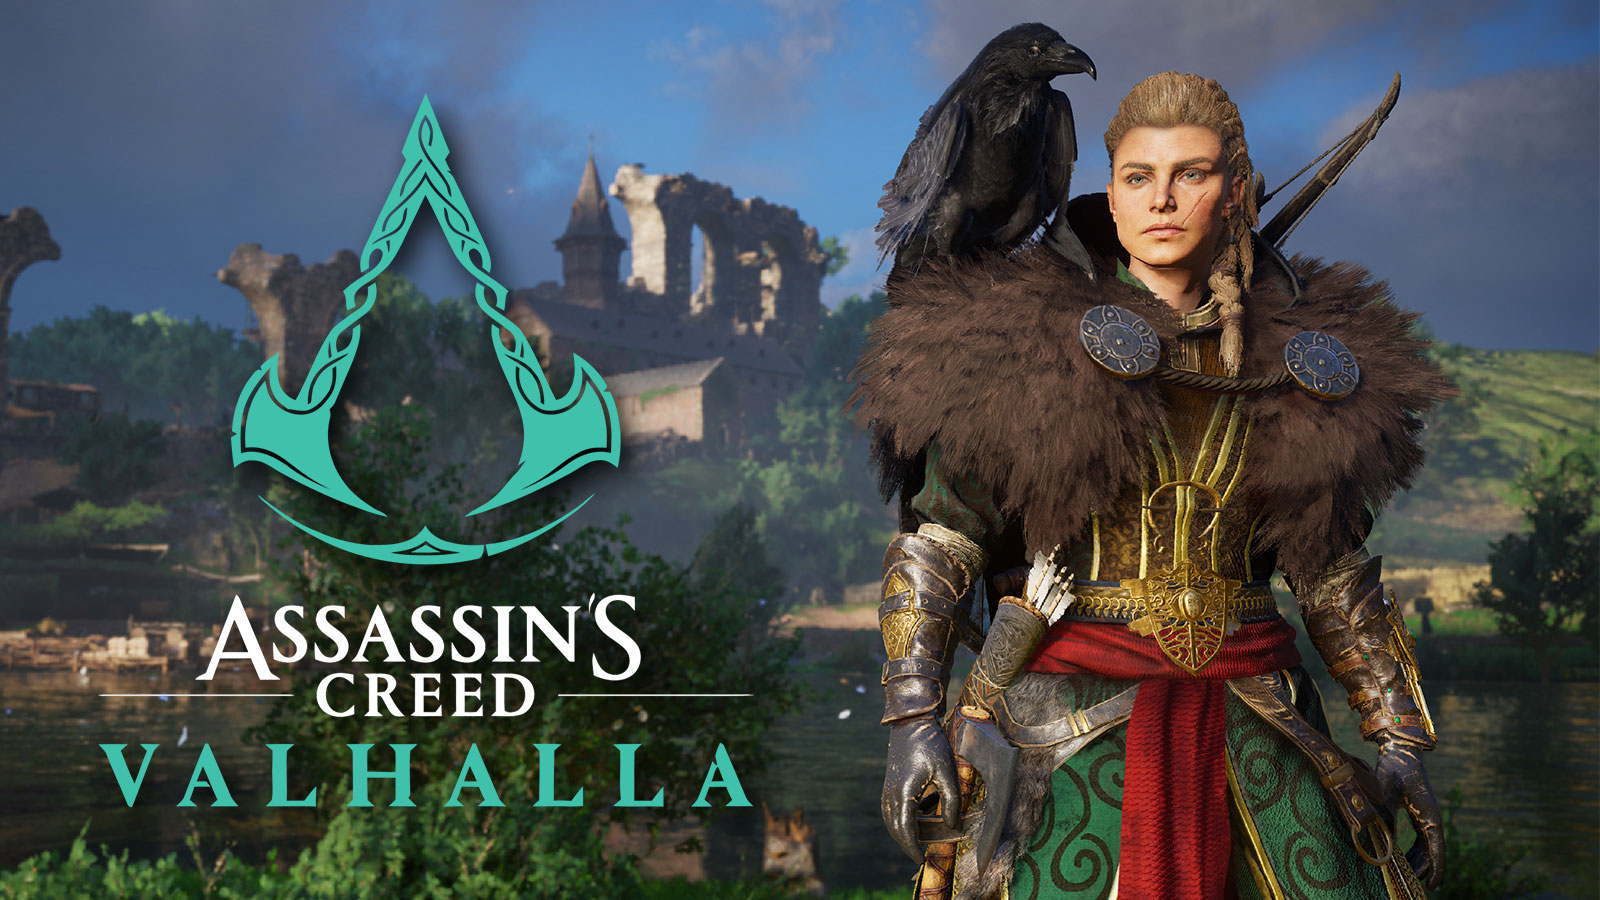 Tips to guide you in the early hours of 'Assassin's Creed Valhalla